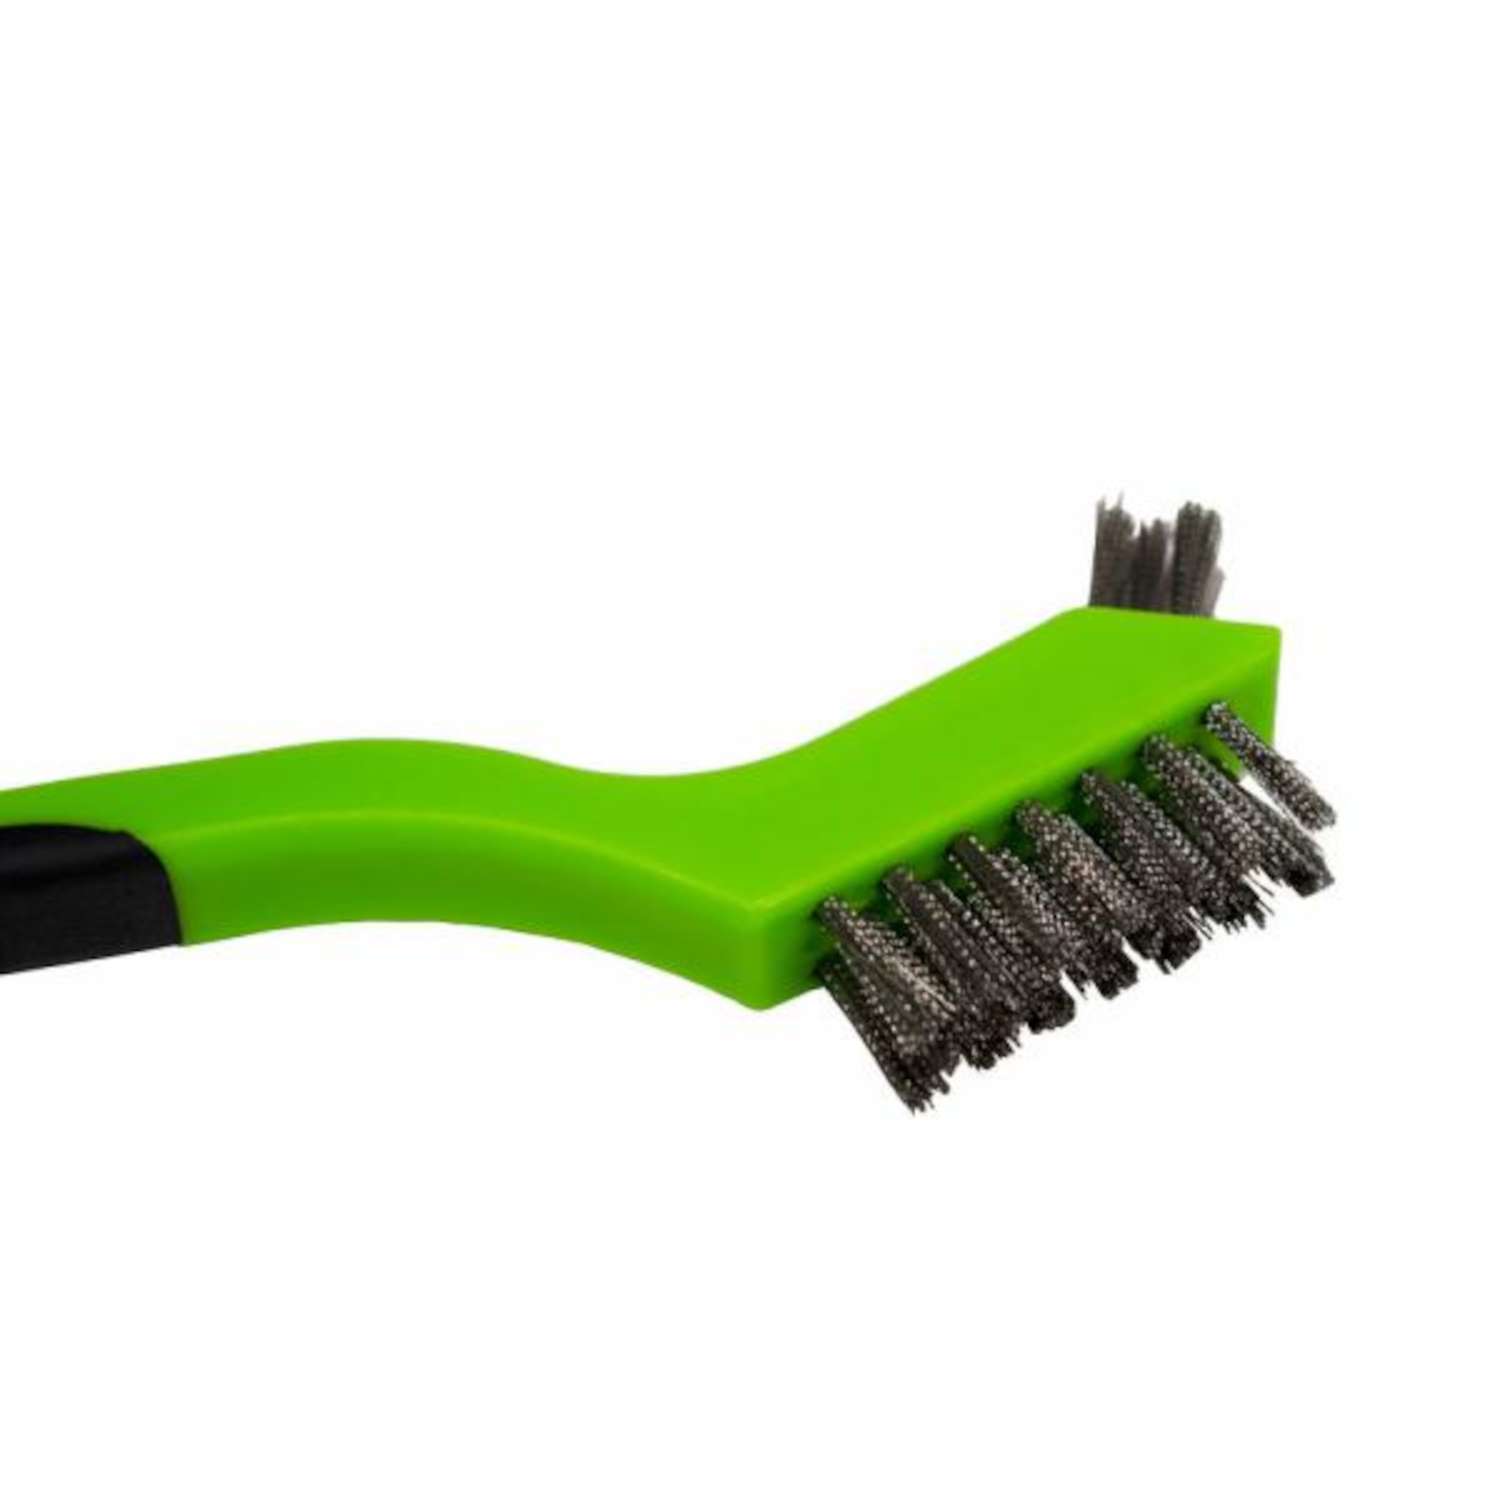 Magnolia Brush Handy Cleaning Brushes, 7 in, Nylon Wire, Plastic